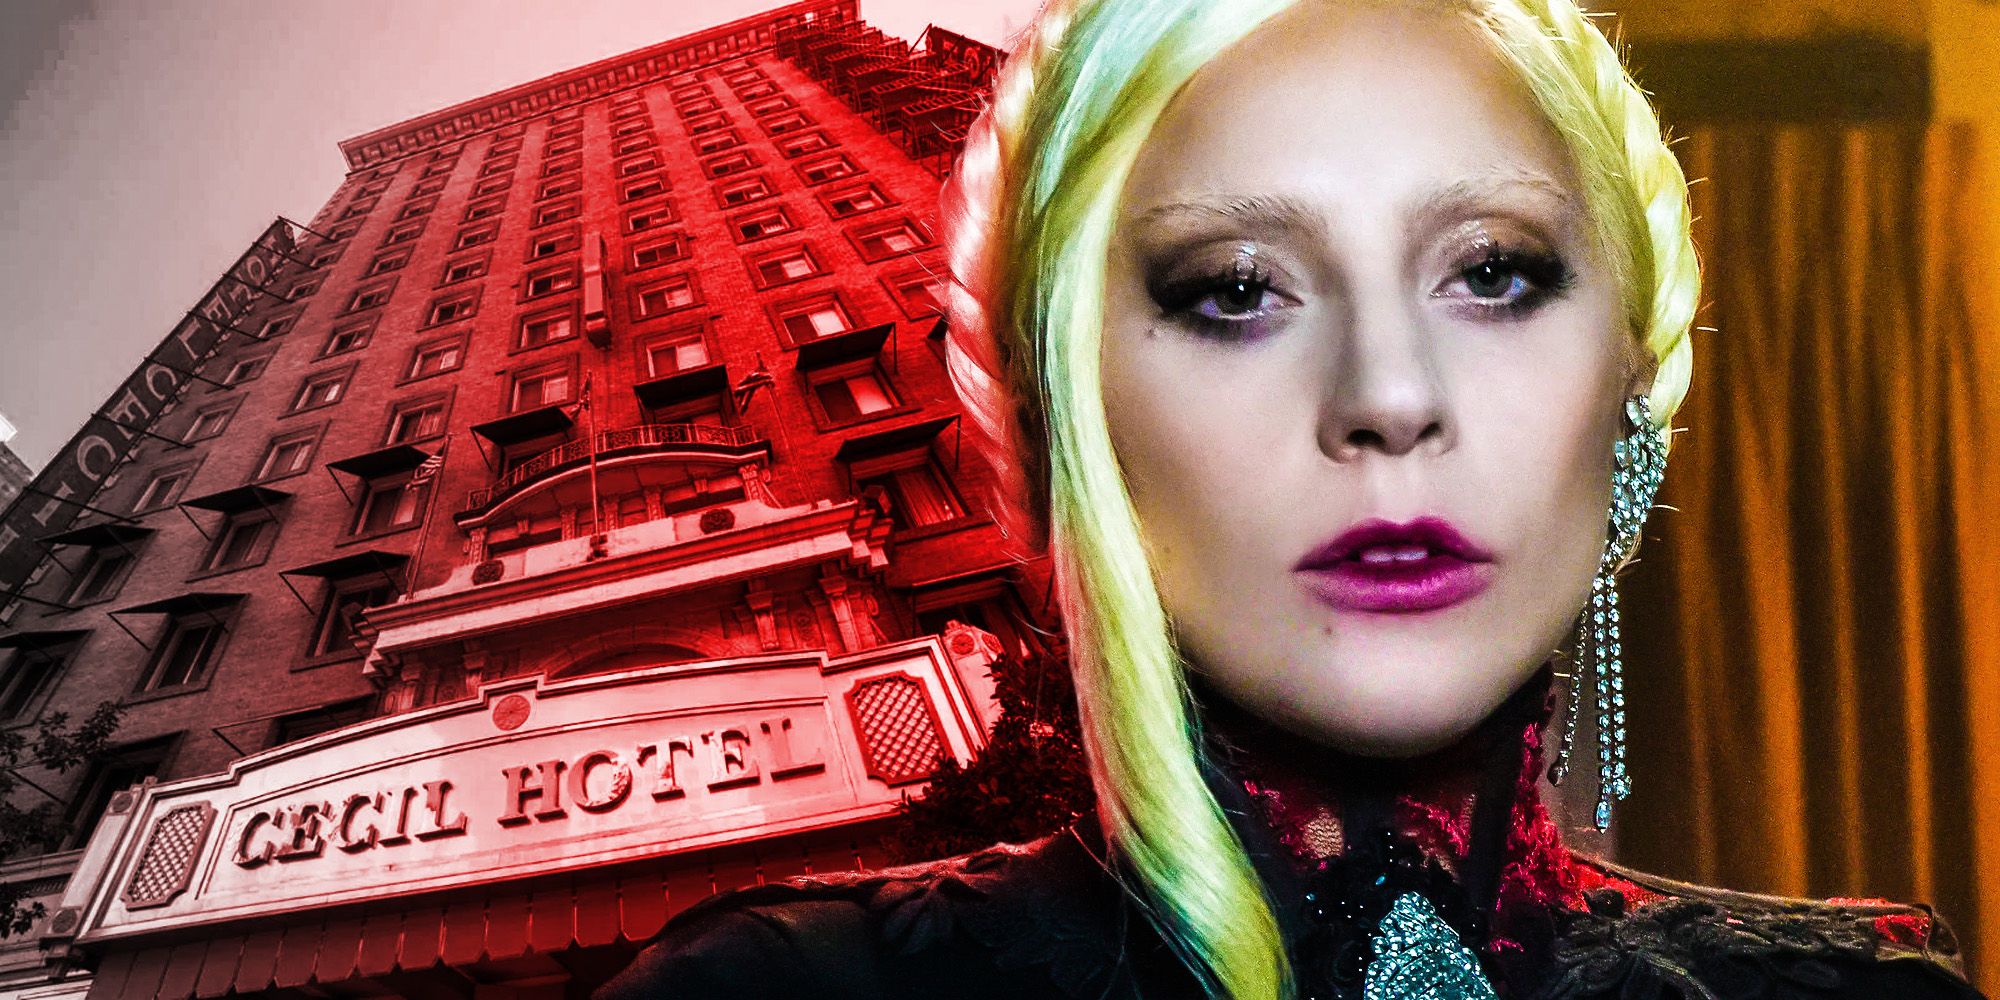 American Horror Story Explains Why So Much Crime Happens At The Cecil Hotel